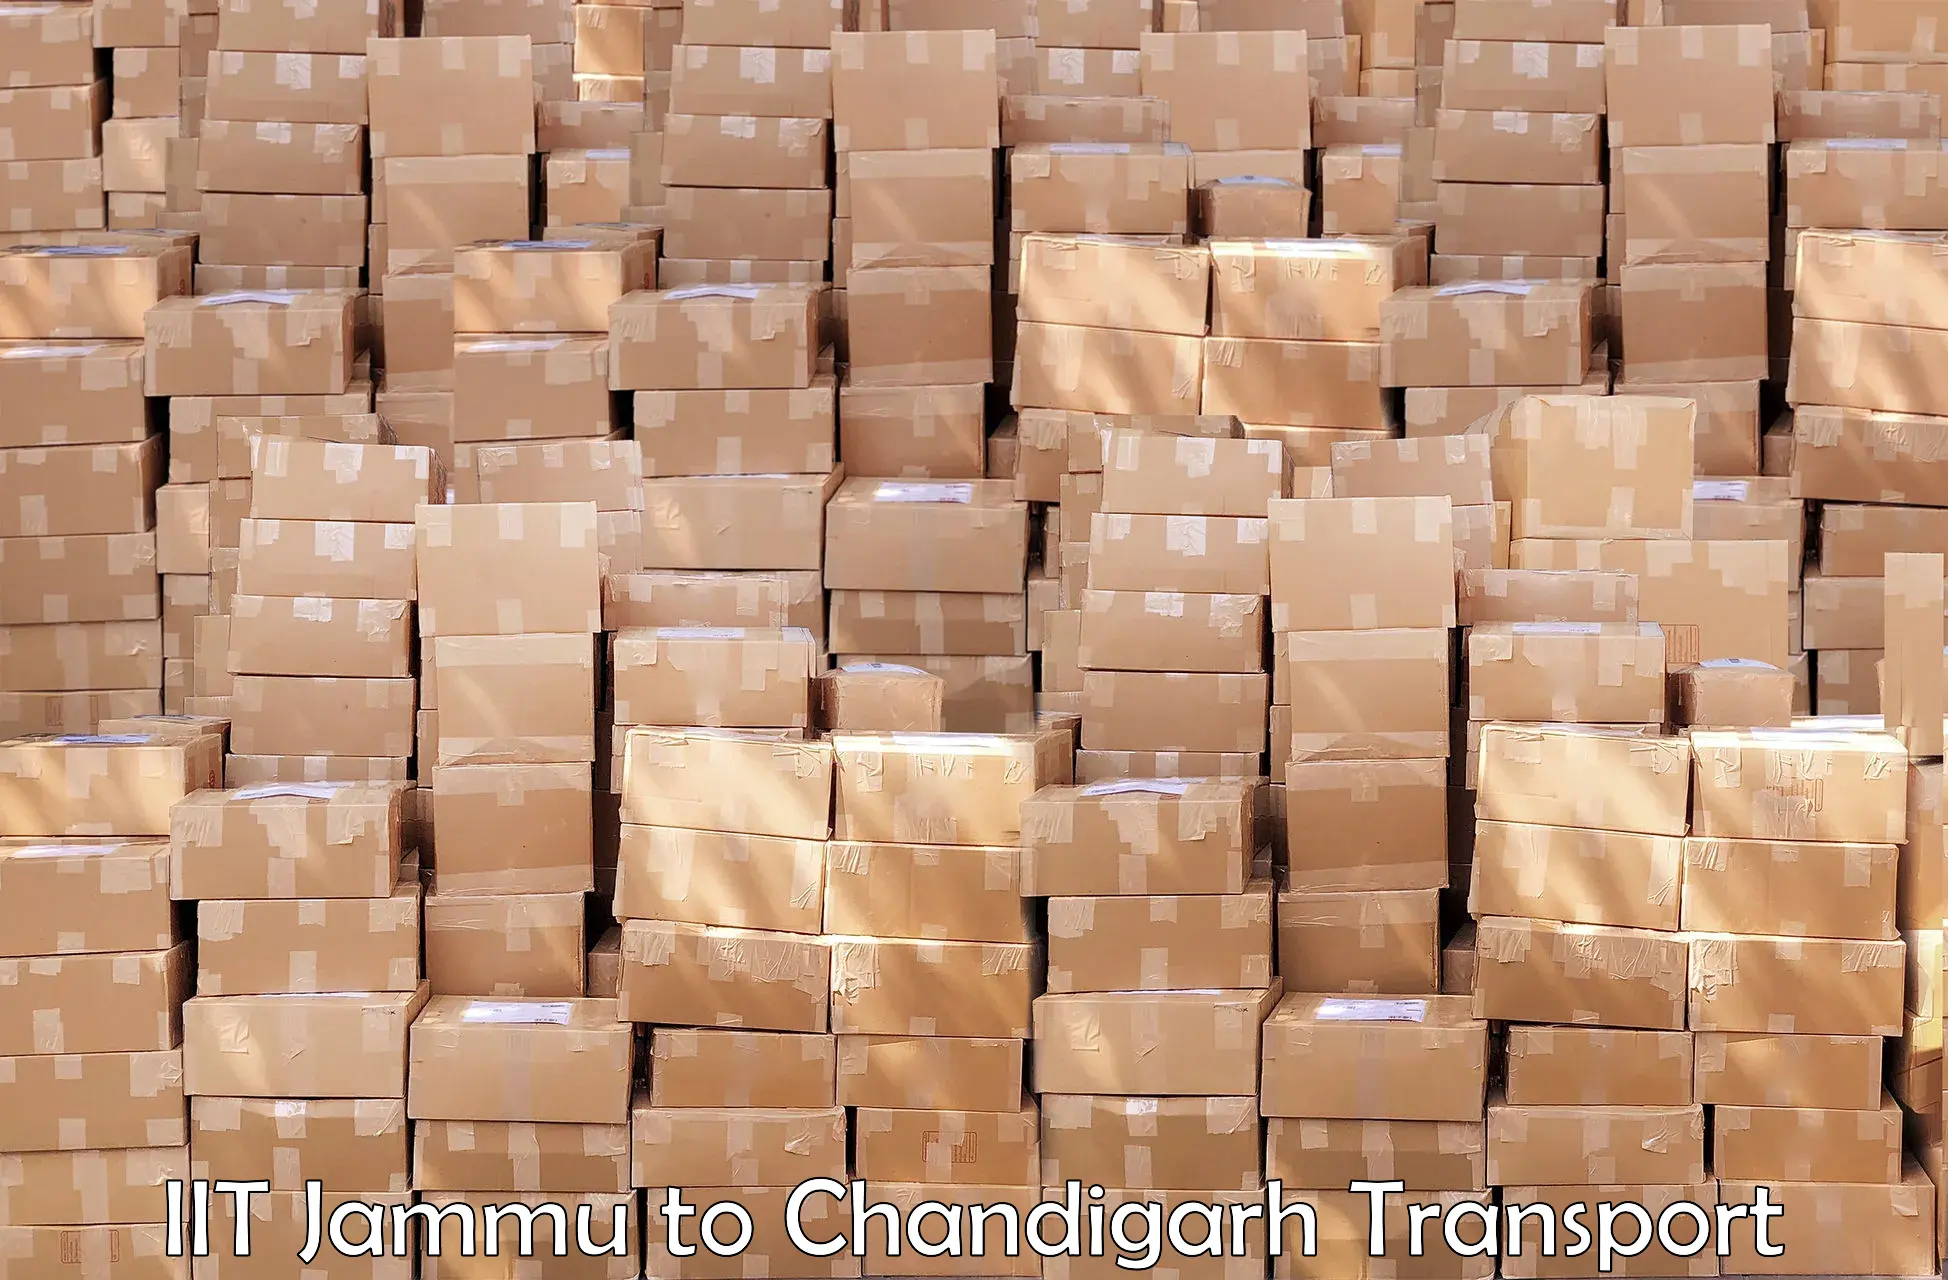 Part load transport service in India in IIT Jammu to Chandigarh